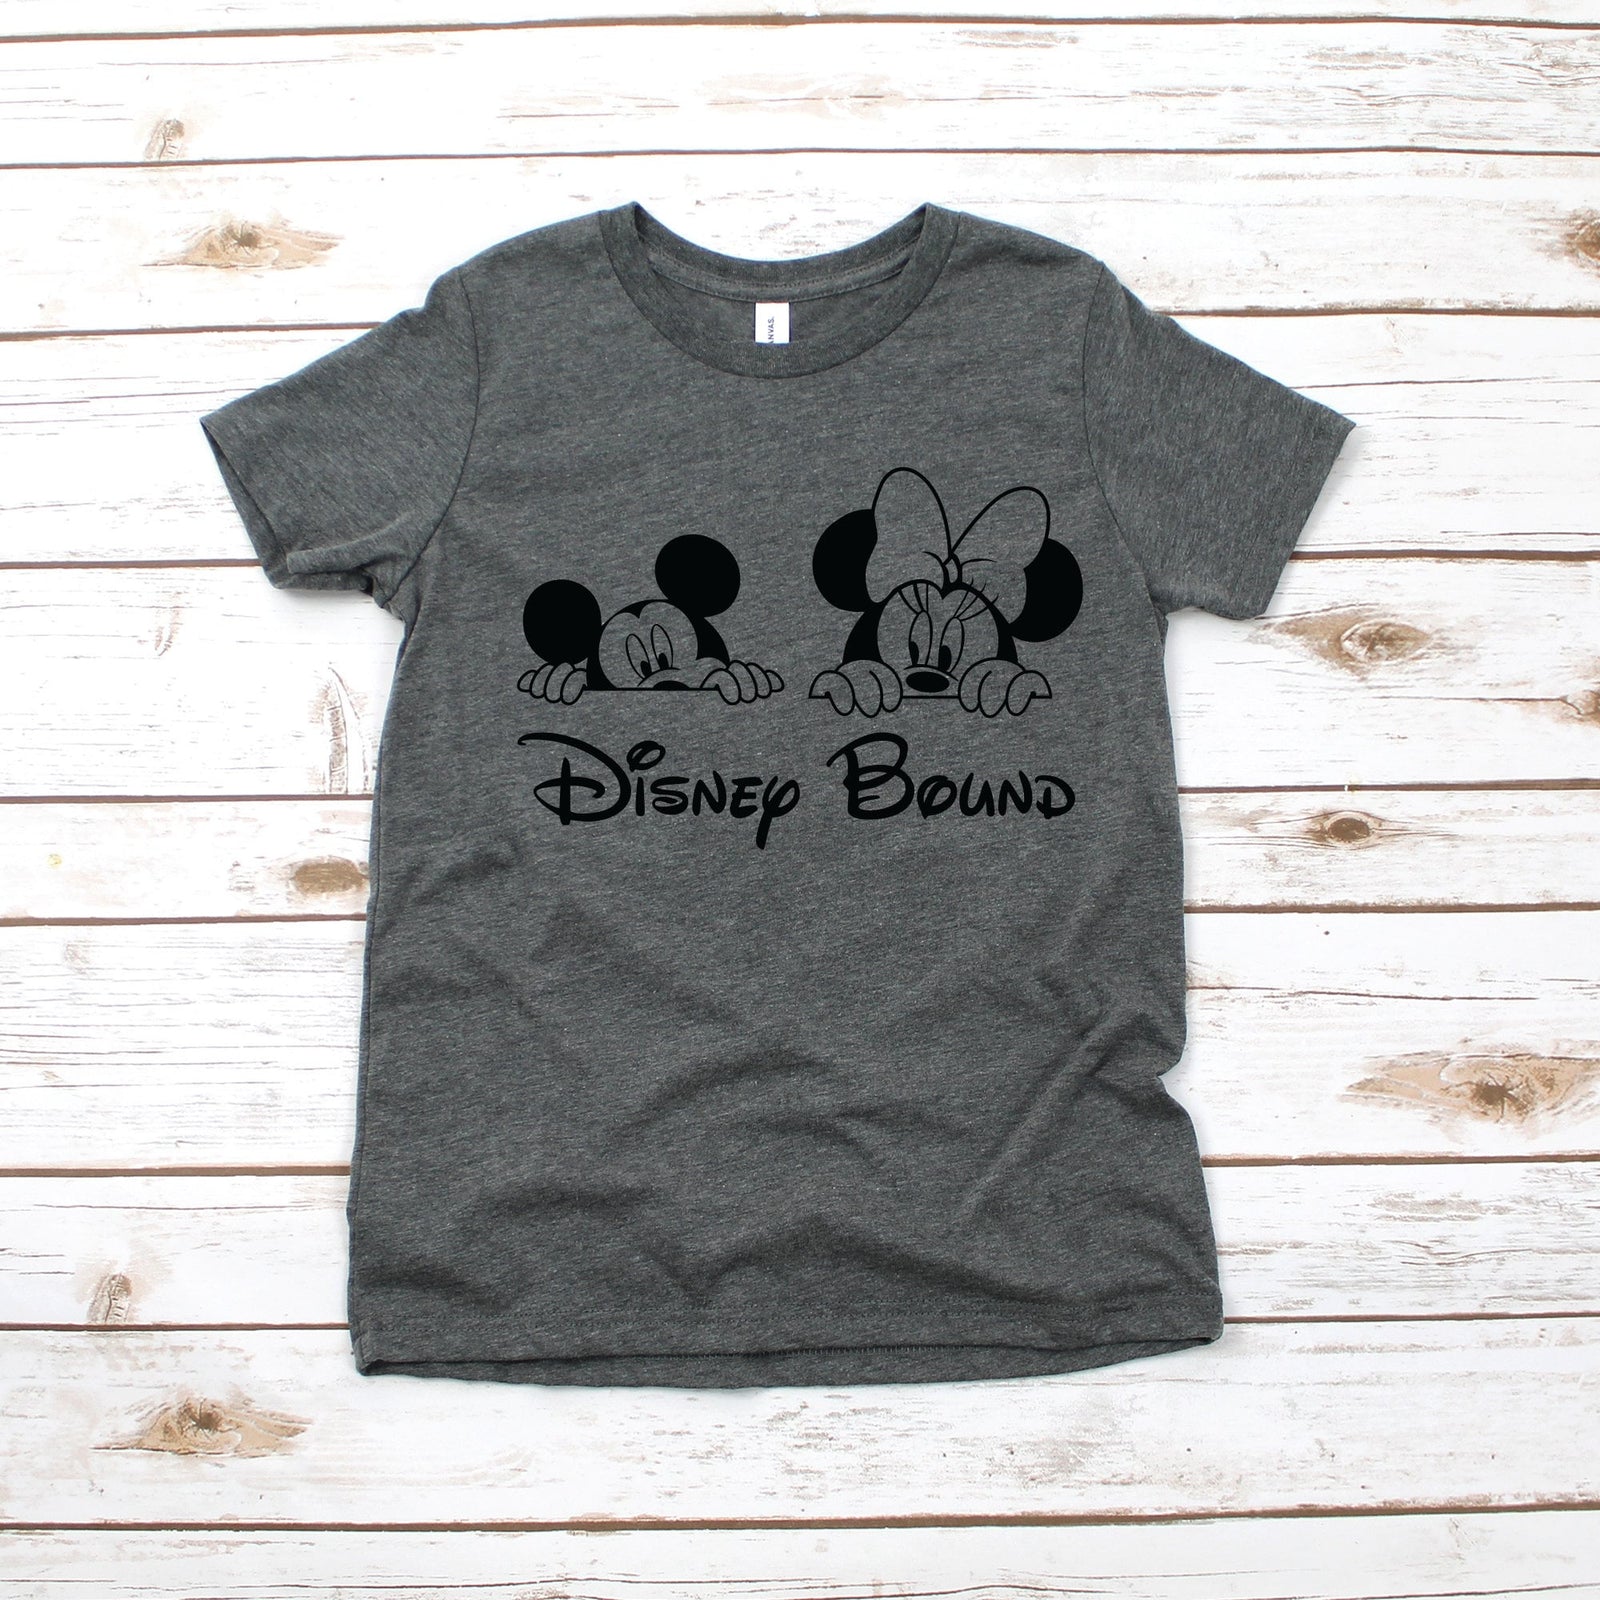 Disney Bound T Shirt- Infant Toddler Youth - Mickey and Minnie Mouse Peeking